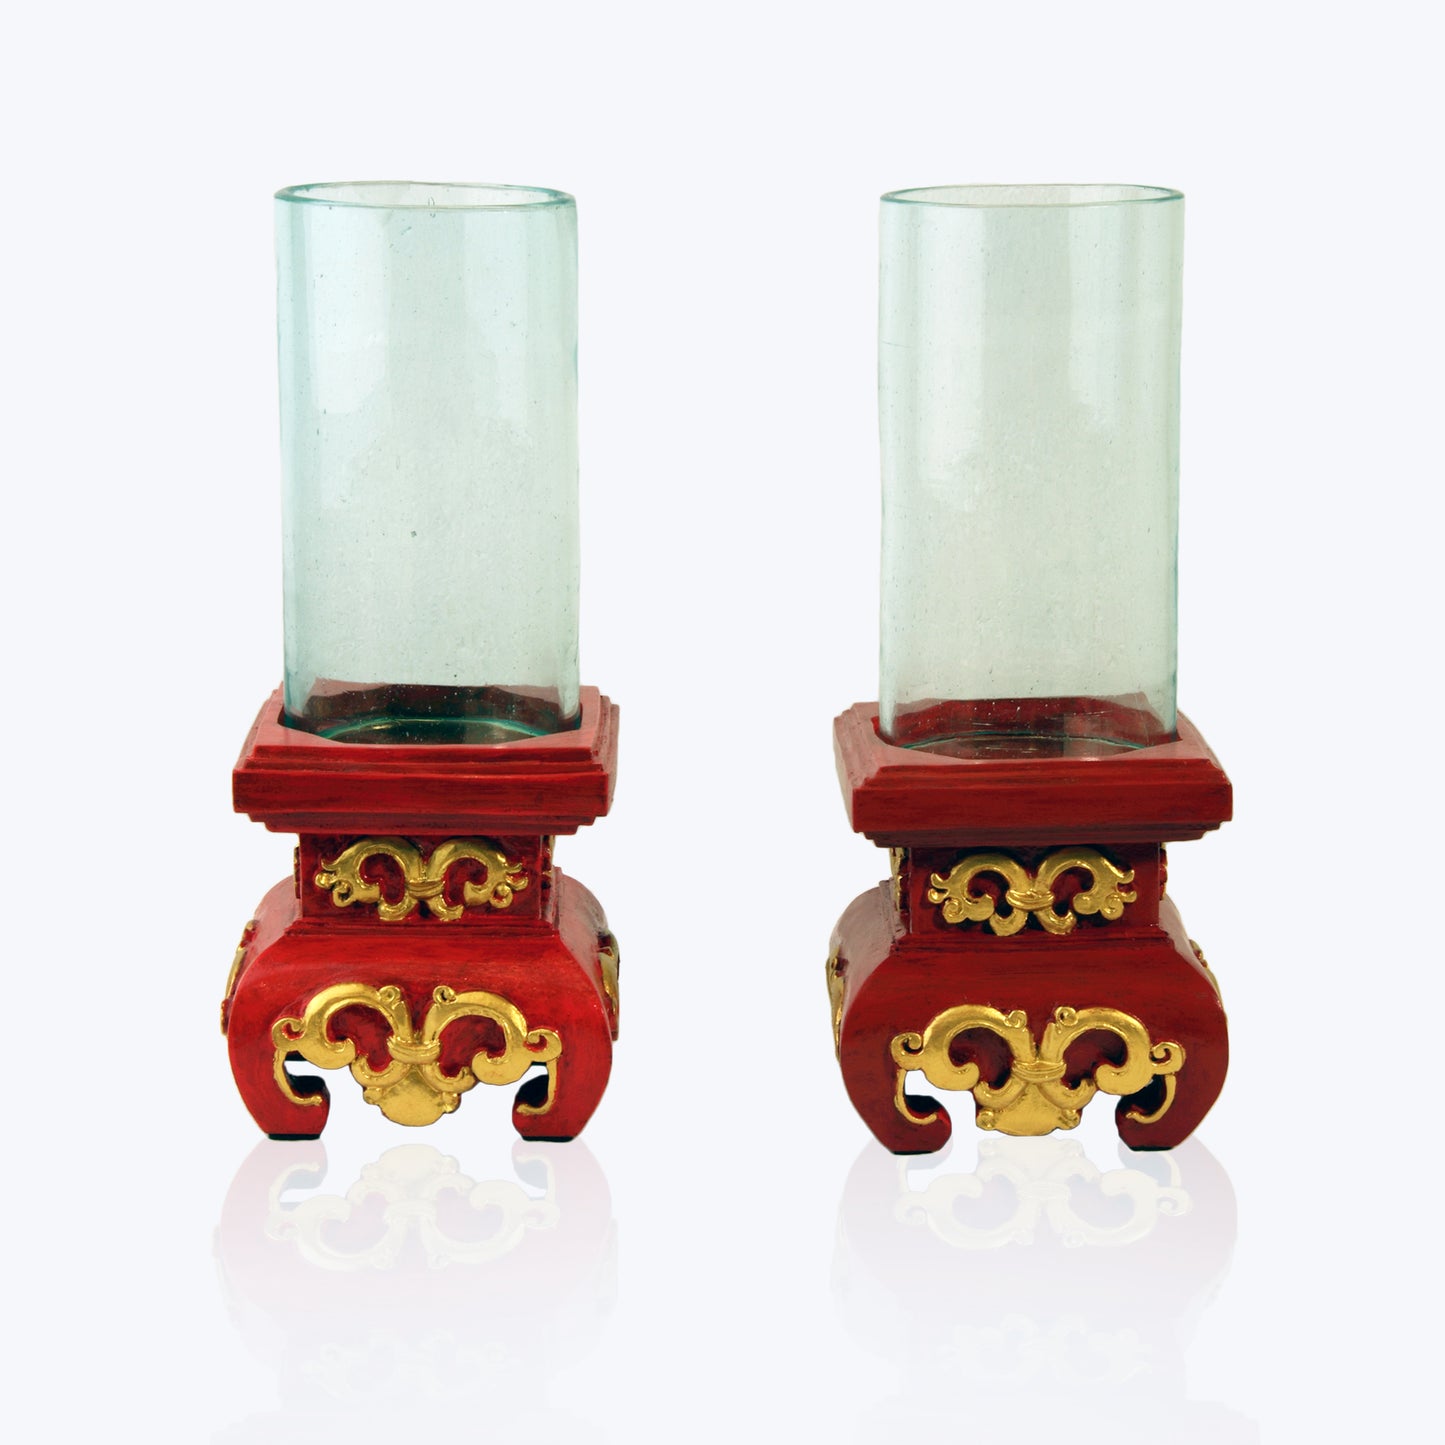 Glass and Wood candle holder (1 pair)